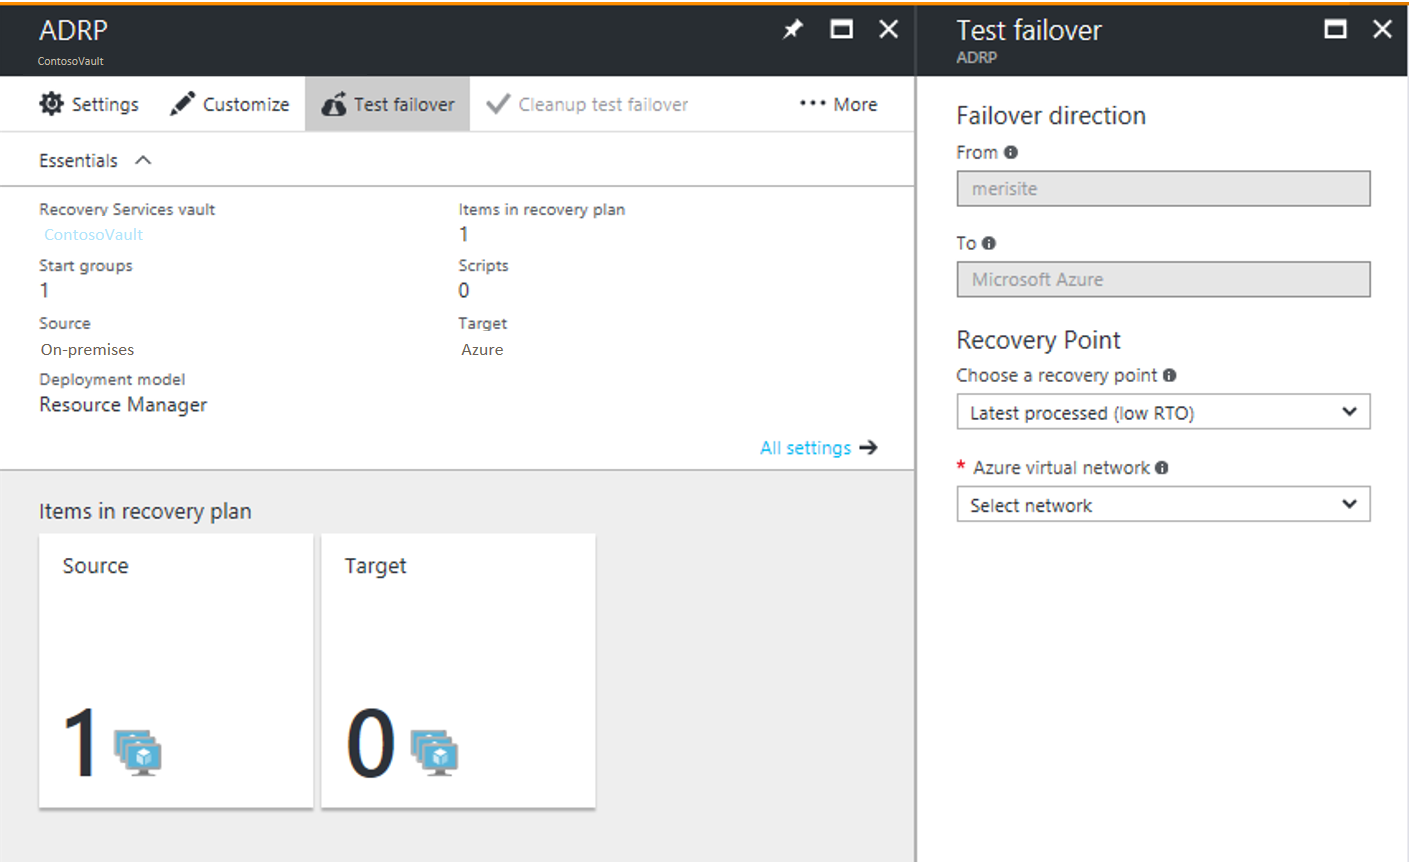 Screenshot of the Test failover page in the Azure portal.